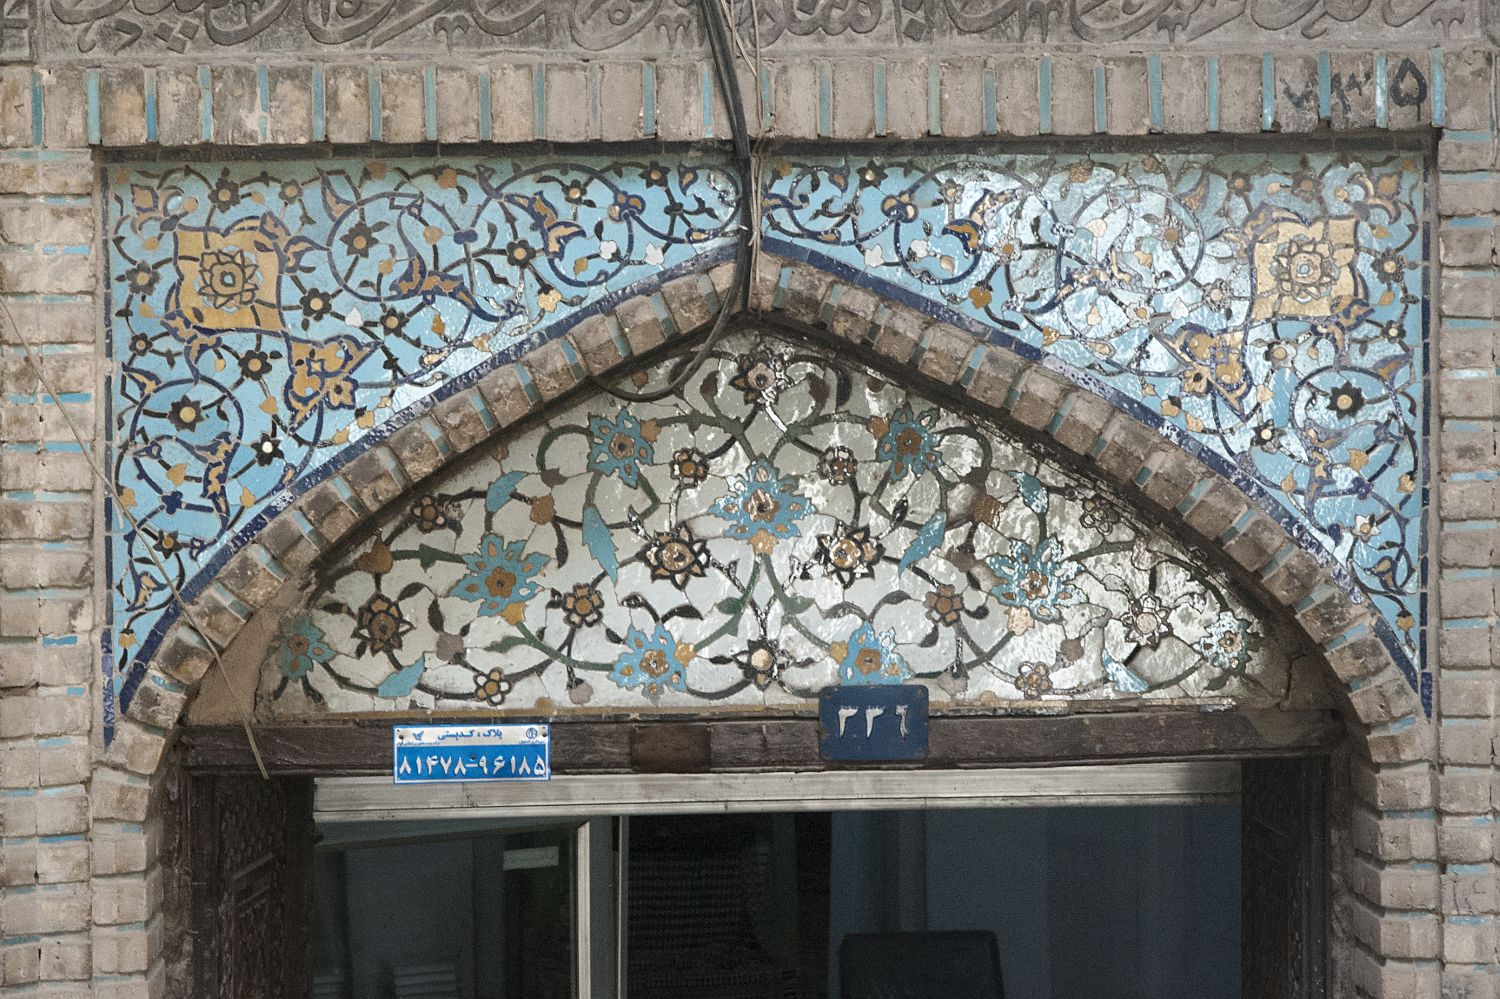 Entrance to Jarchi Mosque (Masjid-i Jarchi), view of tile-clad lunette over a doorway.